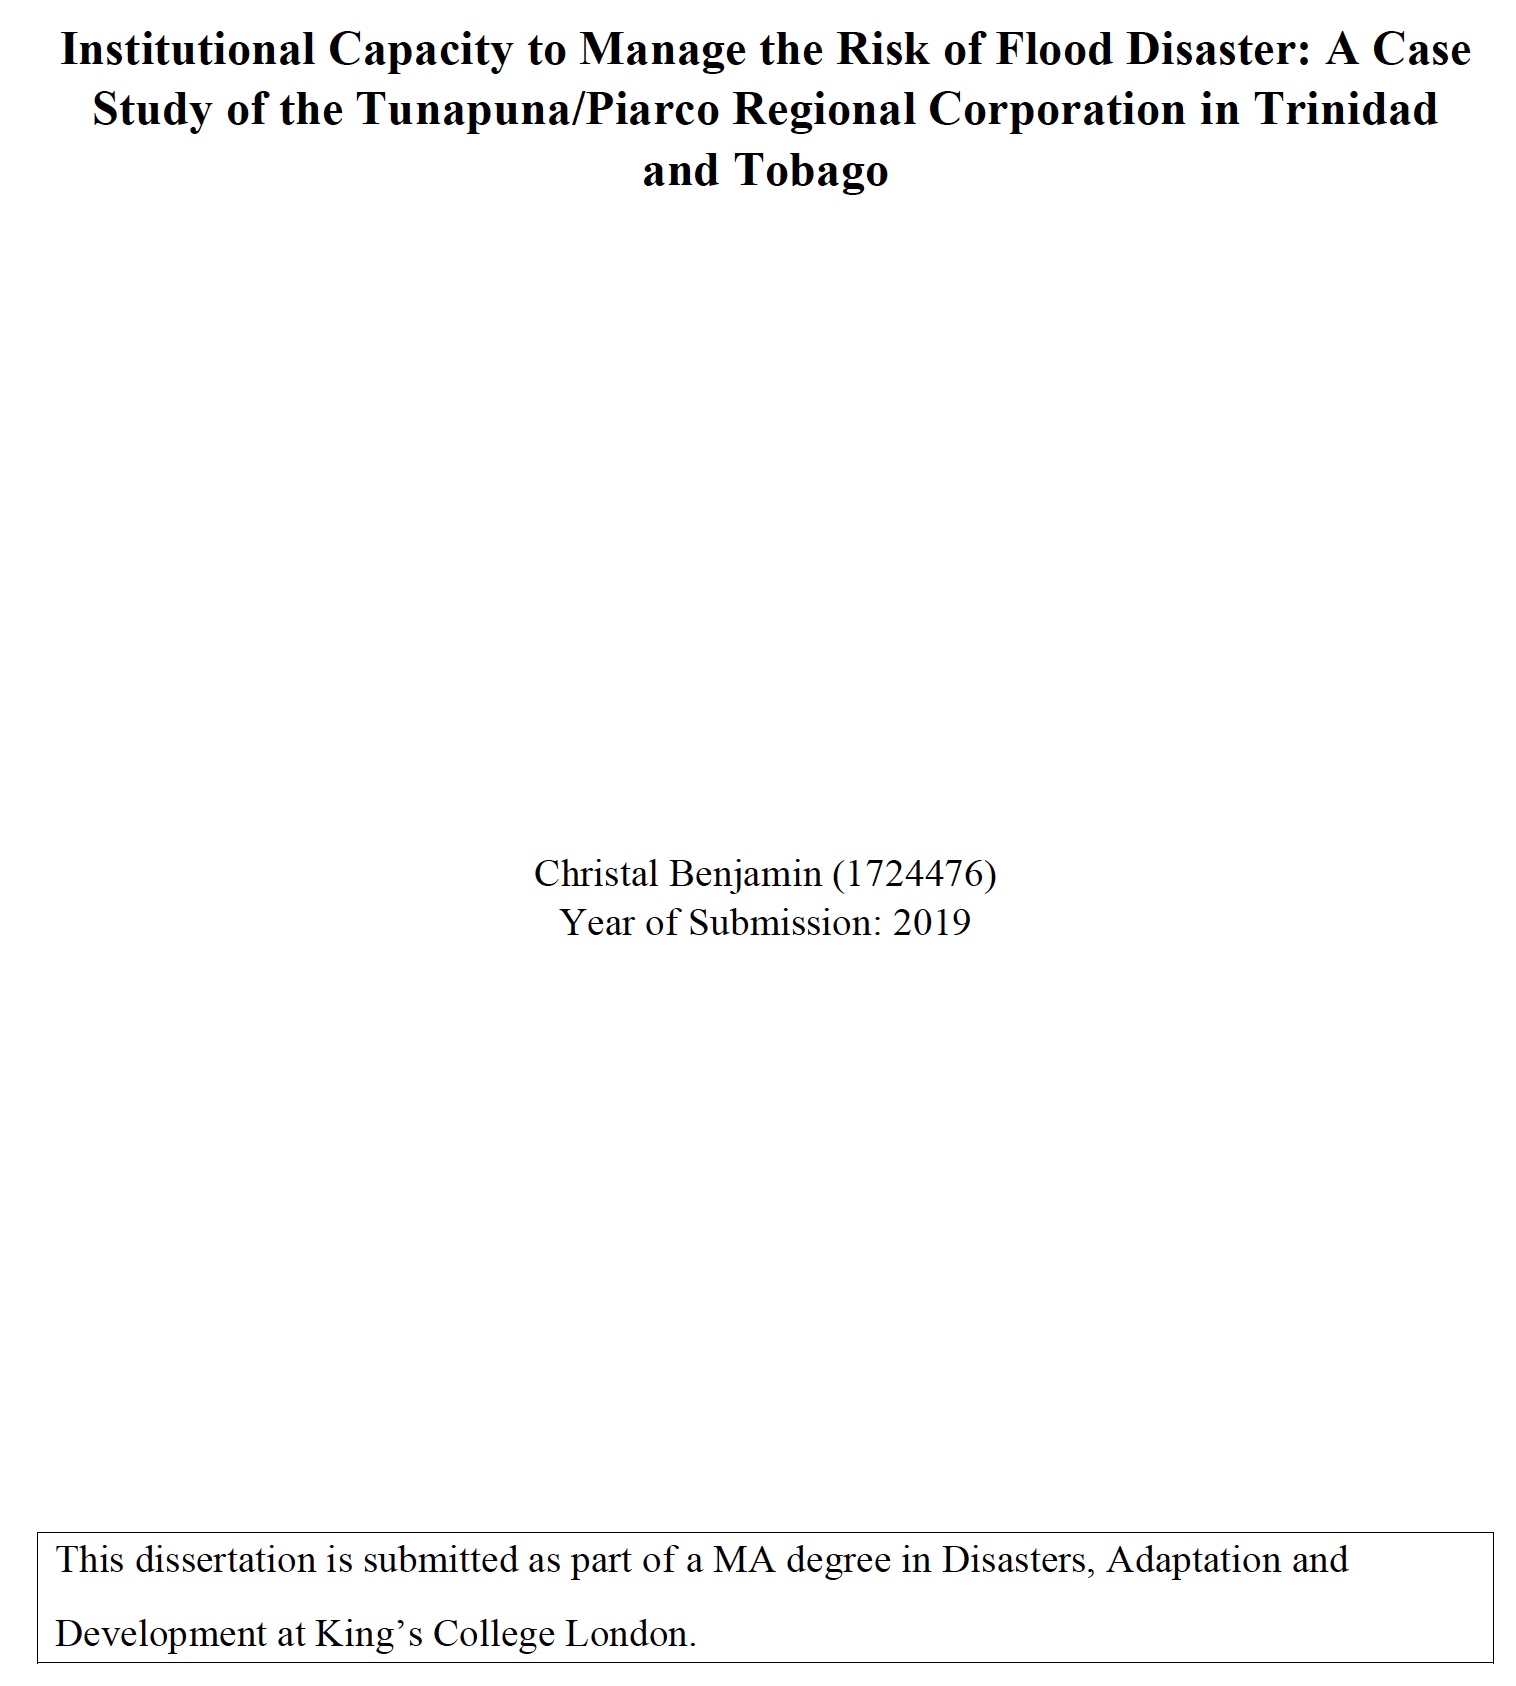 Institutional Capacity to Manage the Risk of Flood Disaster: A Case Study of the Tunapuna/Piarco Regional Corporation in Trinidad and Tobago